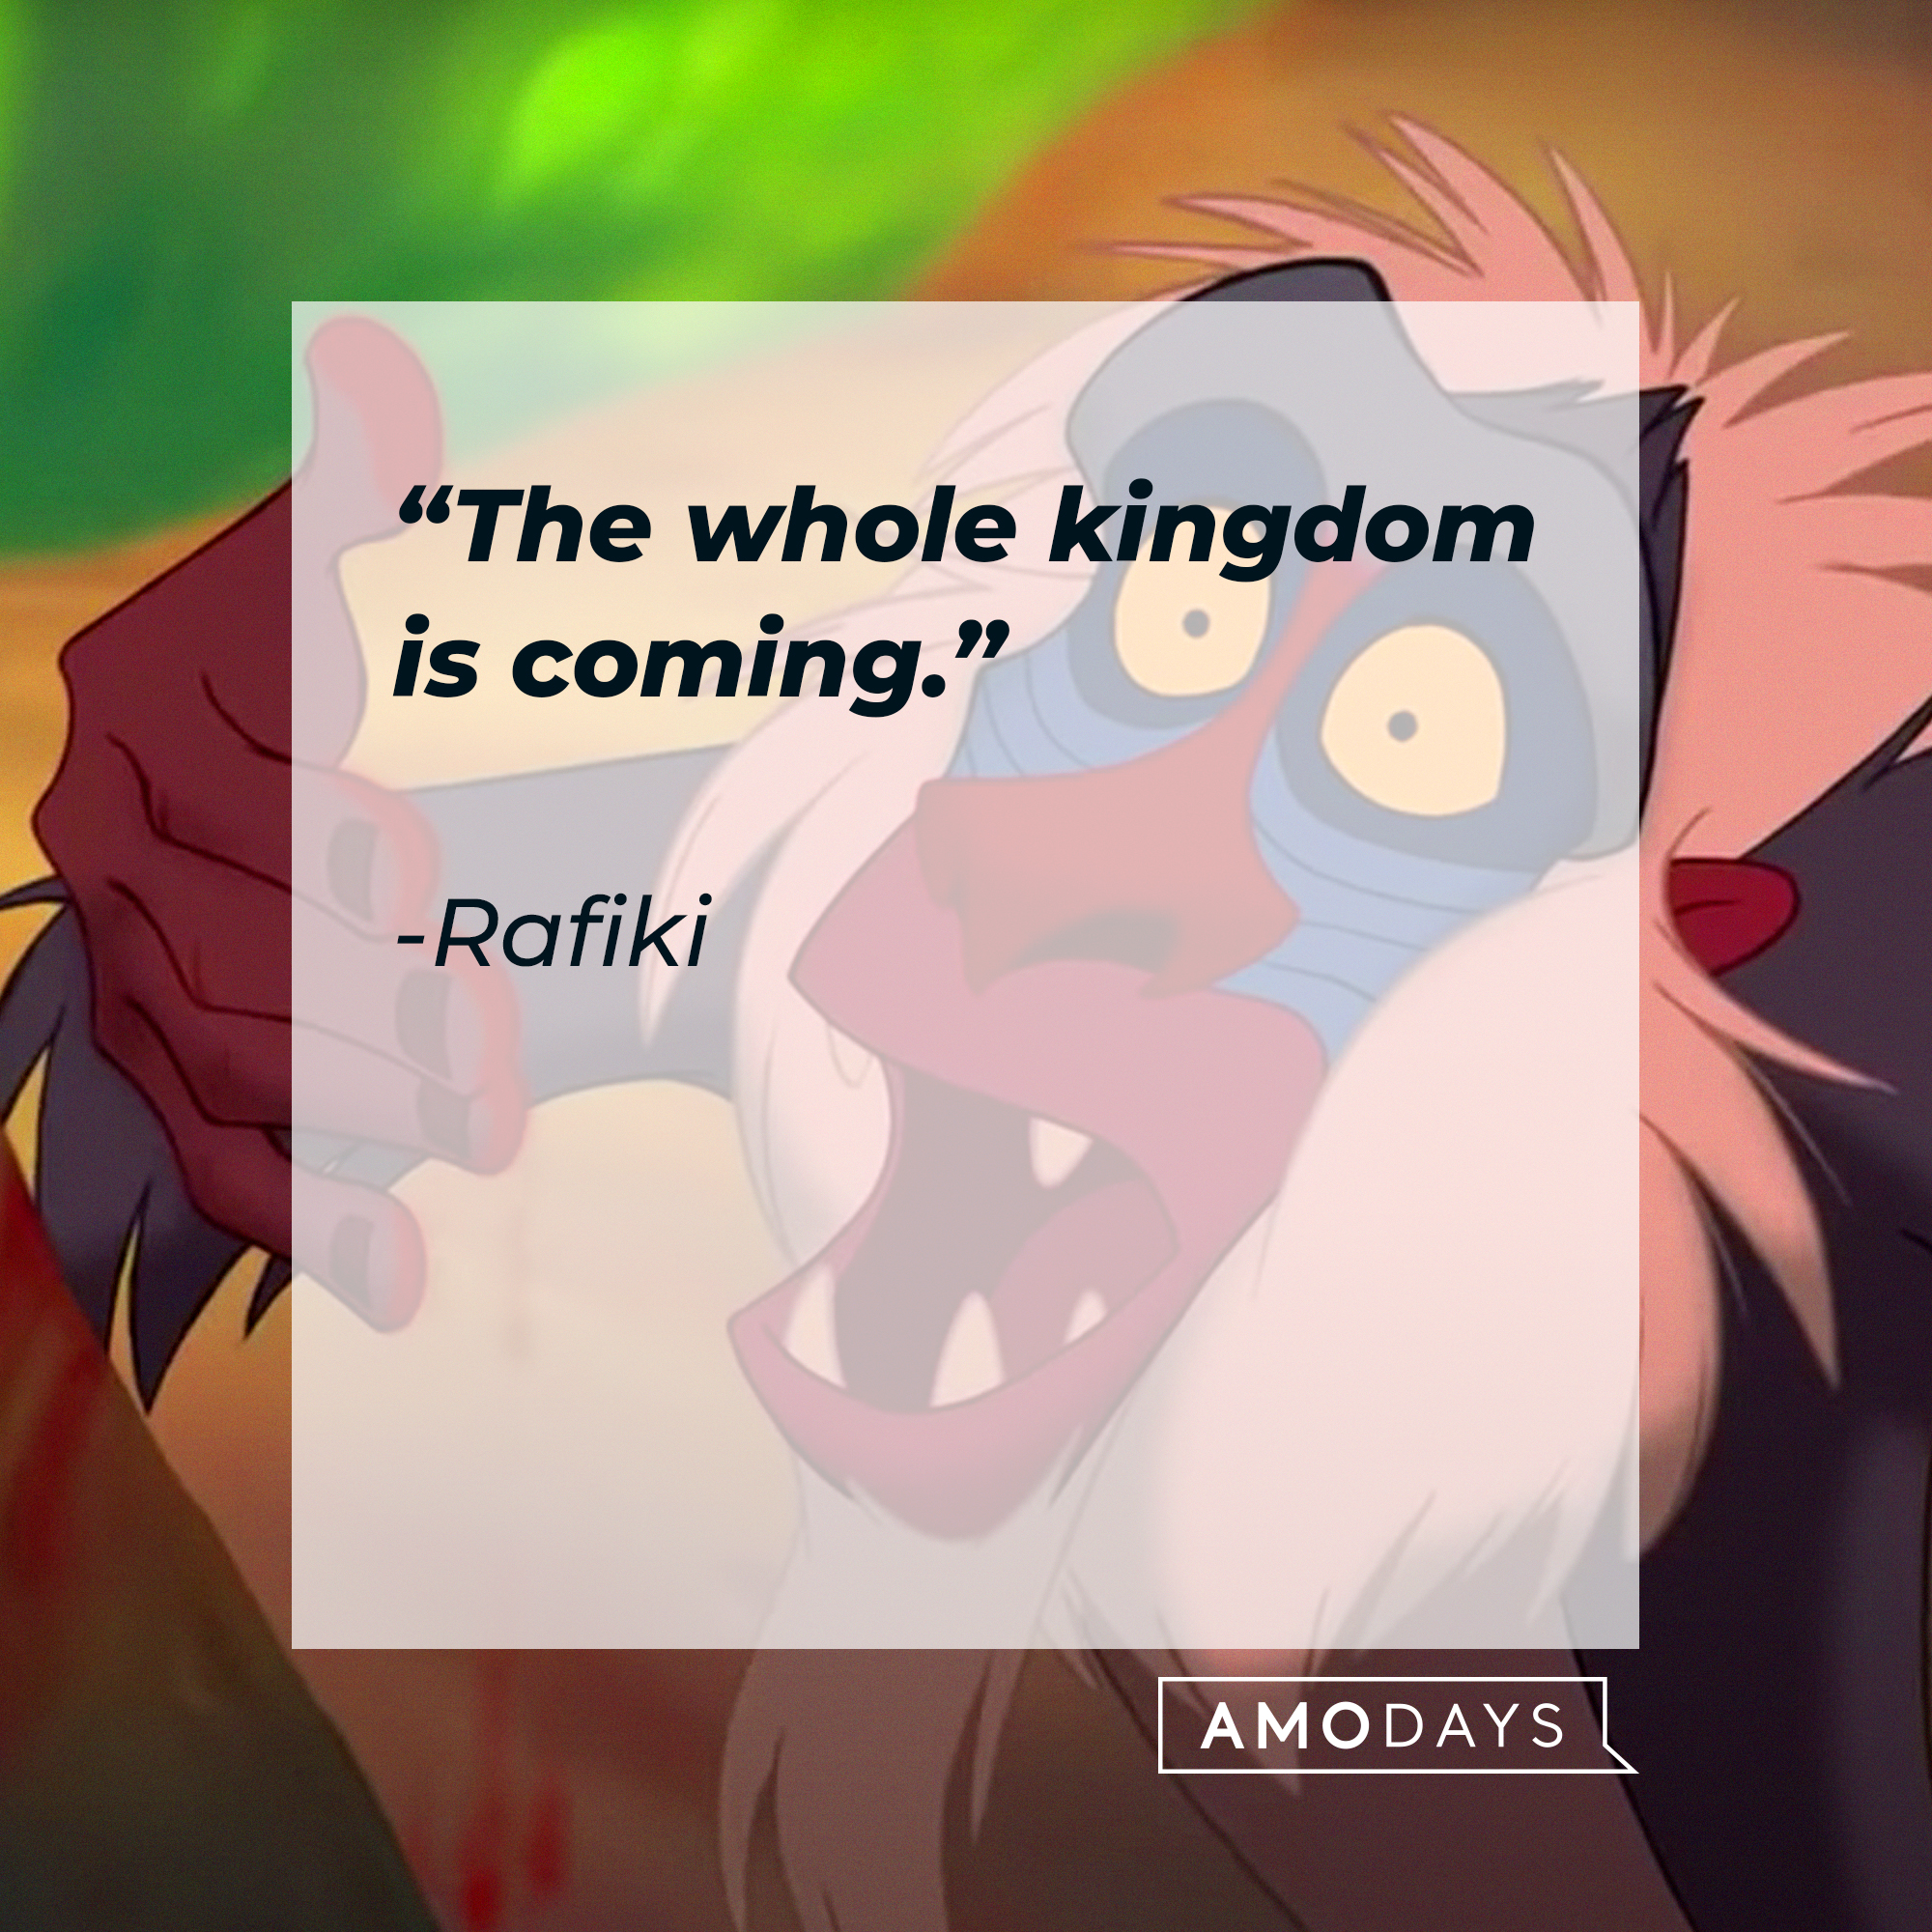 Rafiki's quote: "The whole kingdom is coming." | Source: Facebook/DisneyTheLionKing